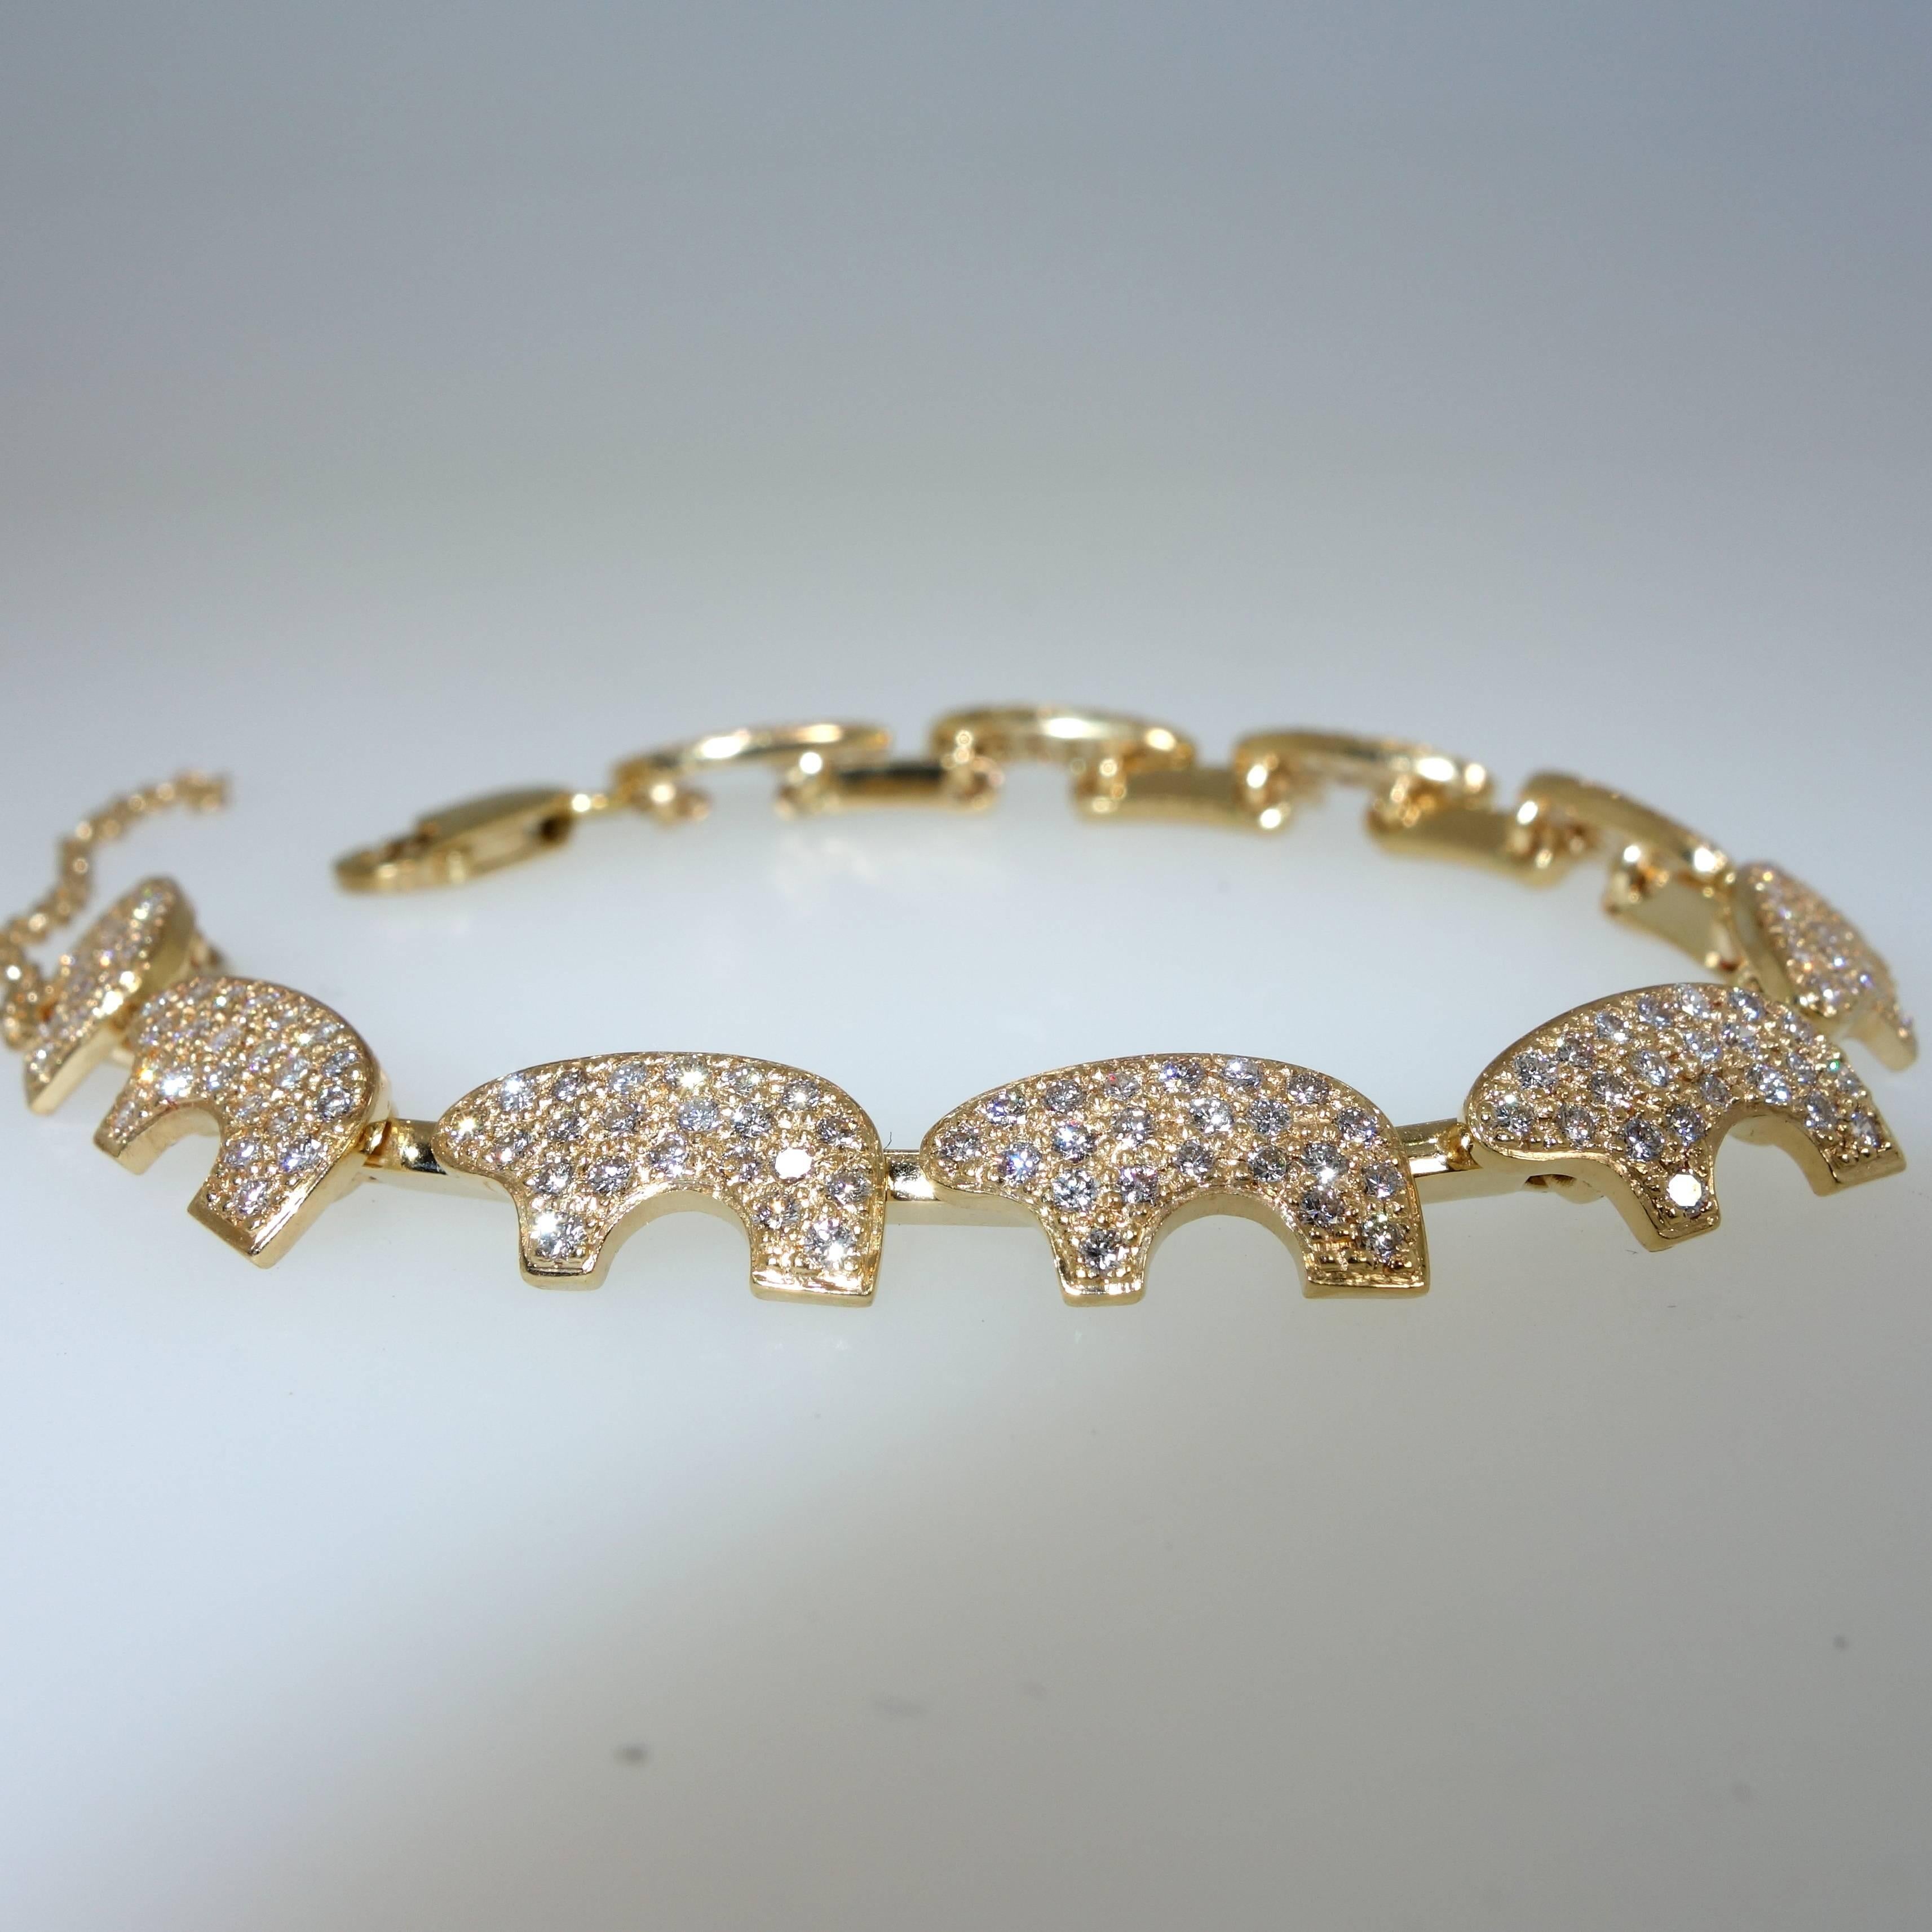 Ten finely pave set diamond bears hand crafted in yellow gold.  There are 220 well matched and finely cut white (H) and very slightly included (VS) diamonds weighing approximately 3.3 cts.  The bracelet is is a hair shorter than seven inches weighs